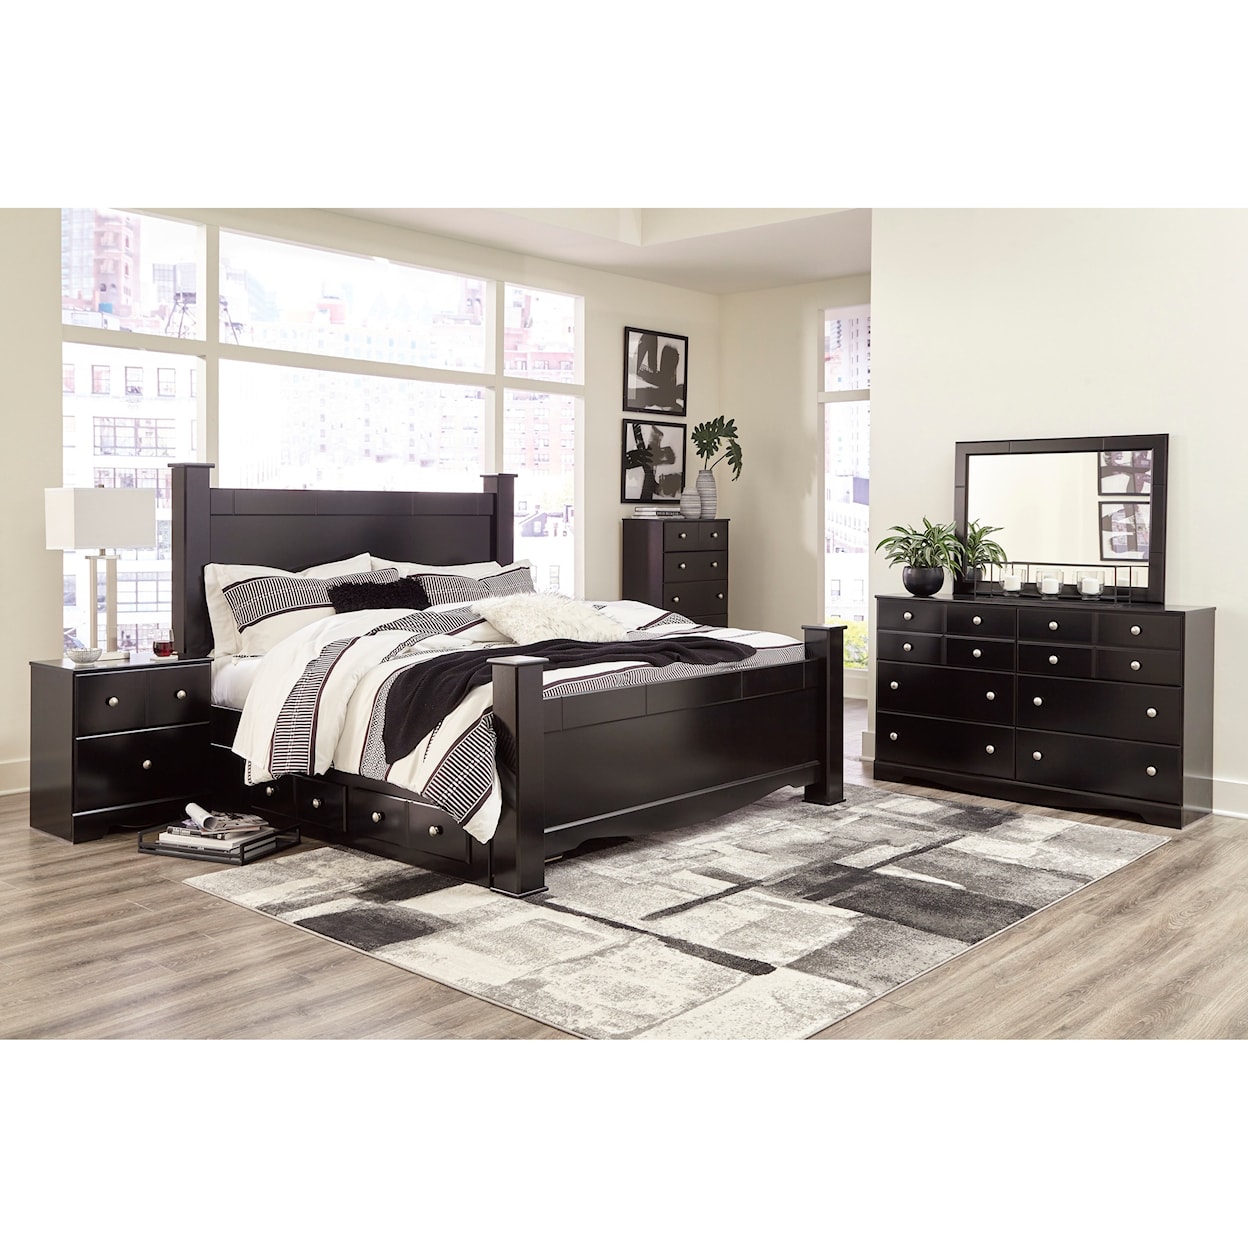 Ashley Furniture Signature Design Mirlotown King Poster Bed with Storage